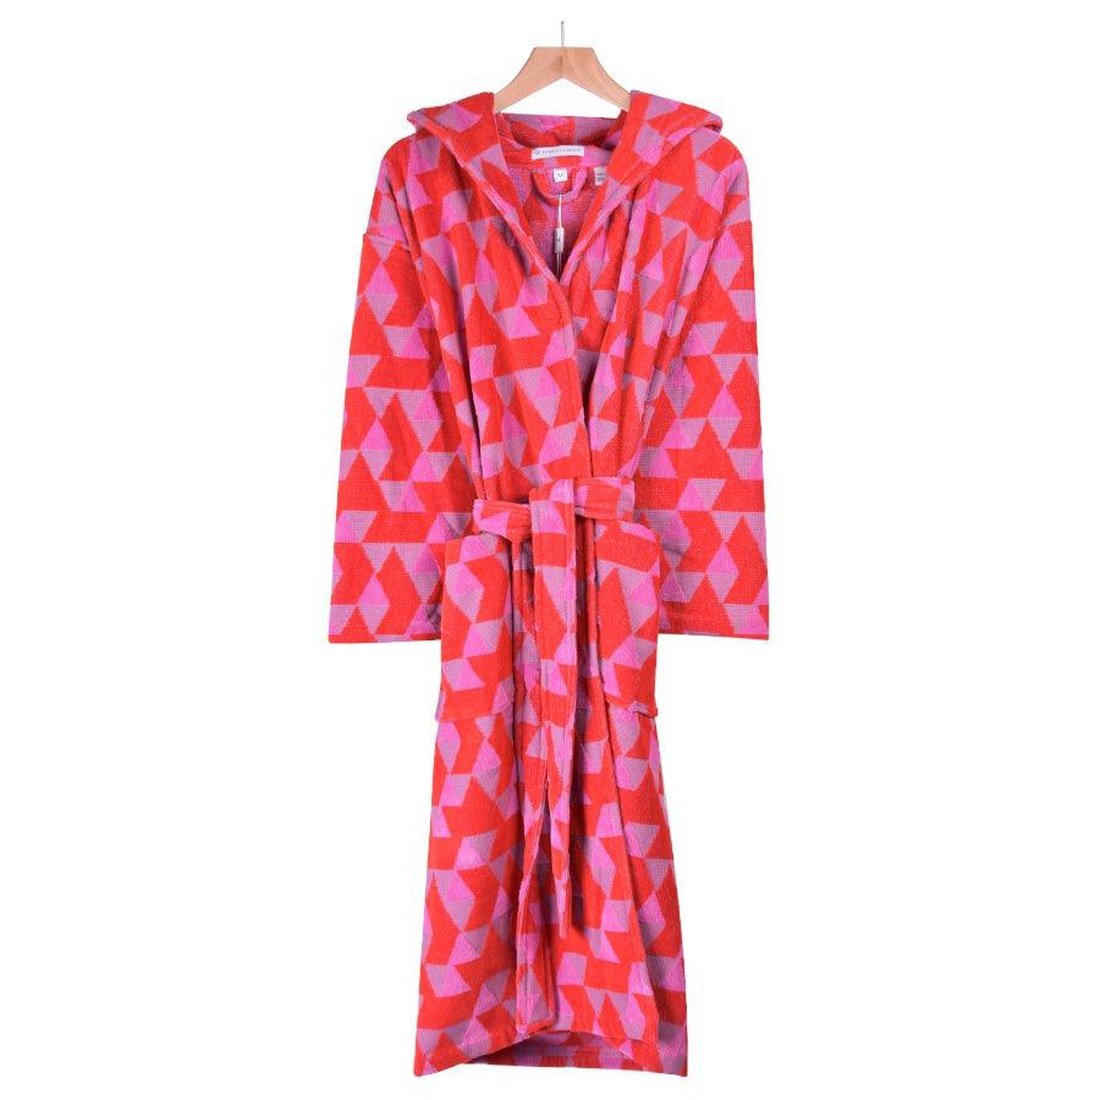 Bown of London pink diamond ladies  dressing gown